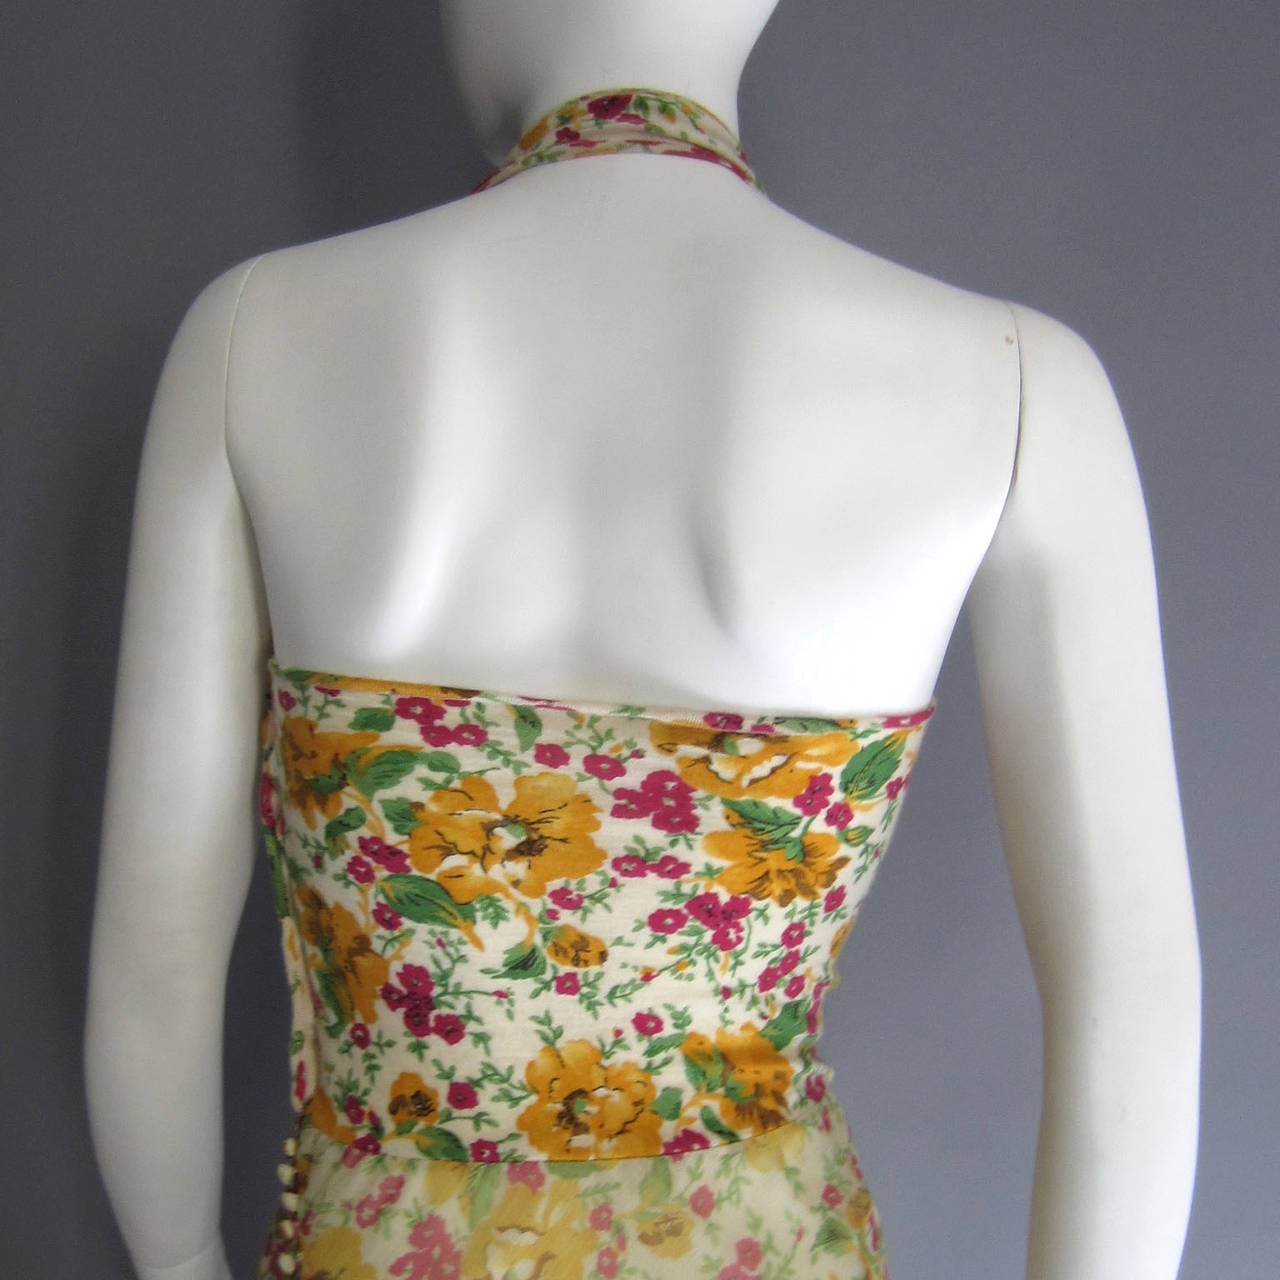 JOHN GALLIANO for CHRISTIAN DIOR Floral Cashmere and Chiffon Bias Gown 2